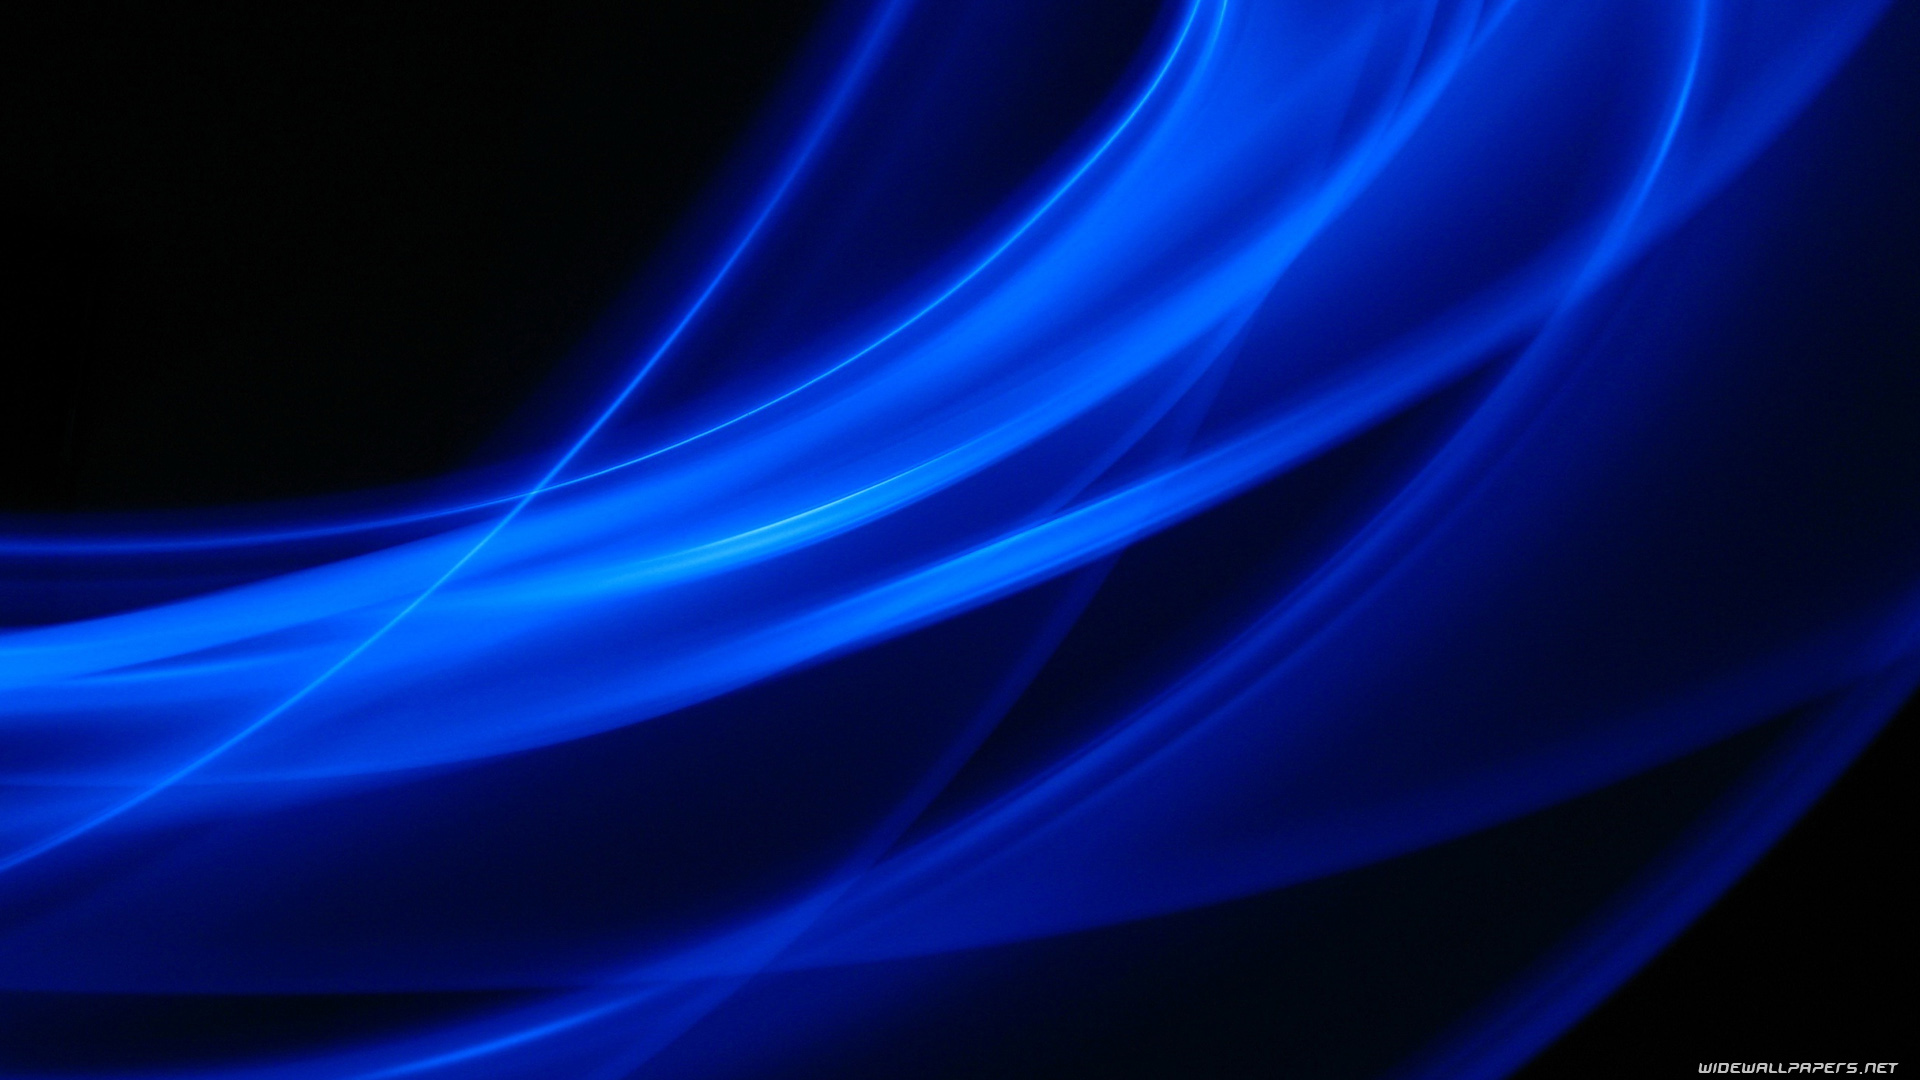 Black and Blue Abstract Widescreen HD Wallpaper